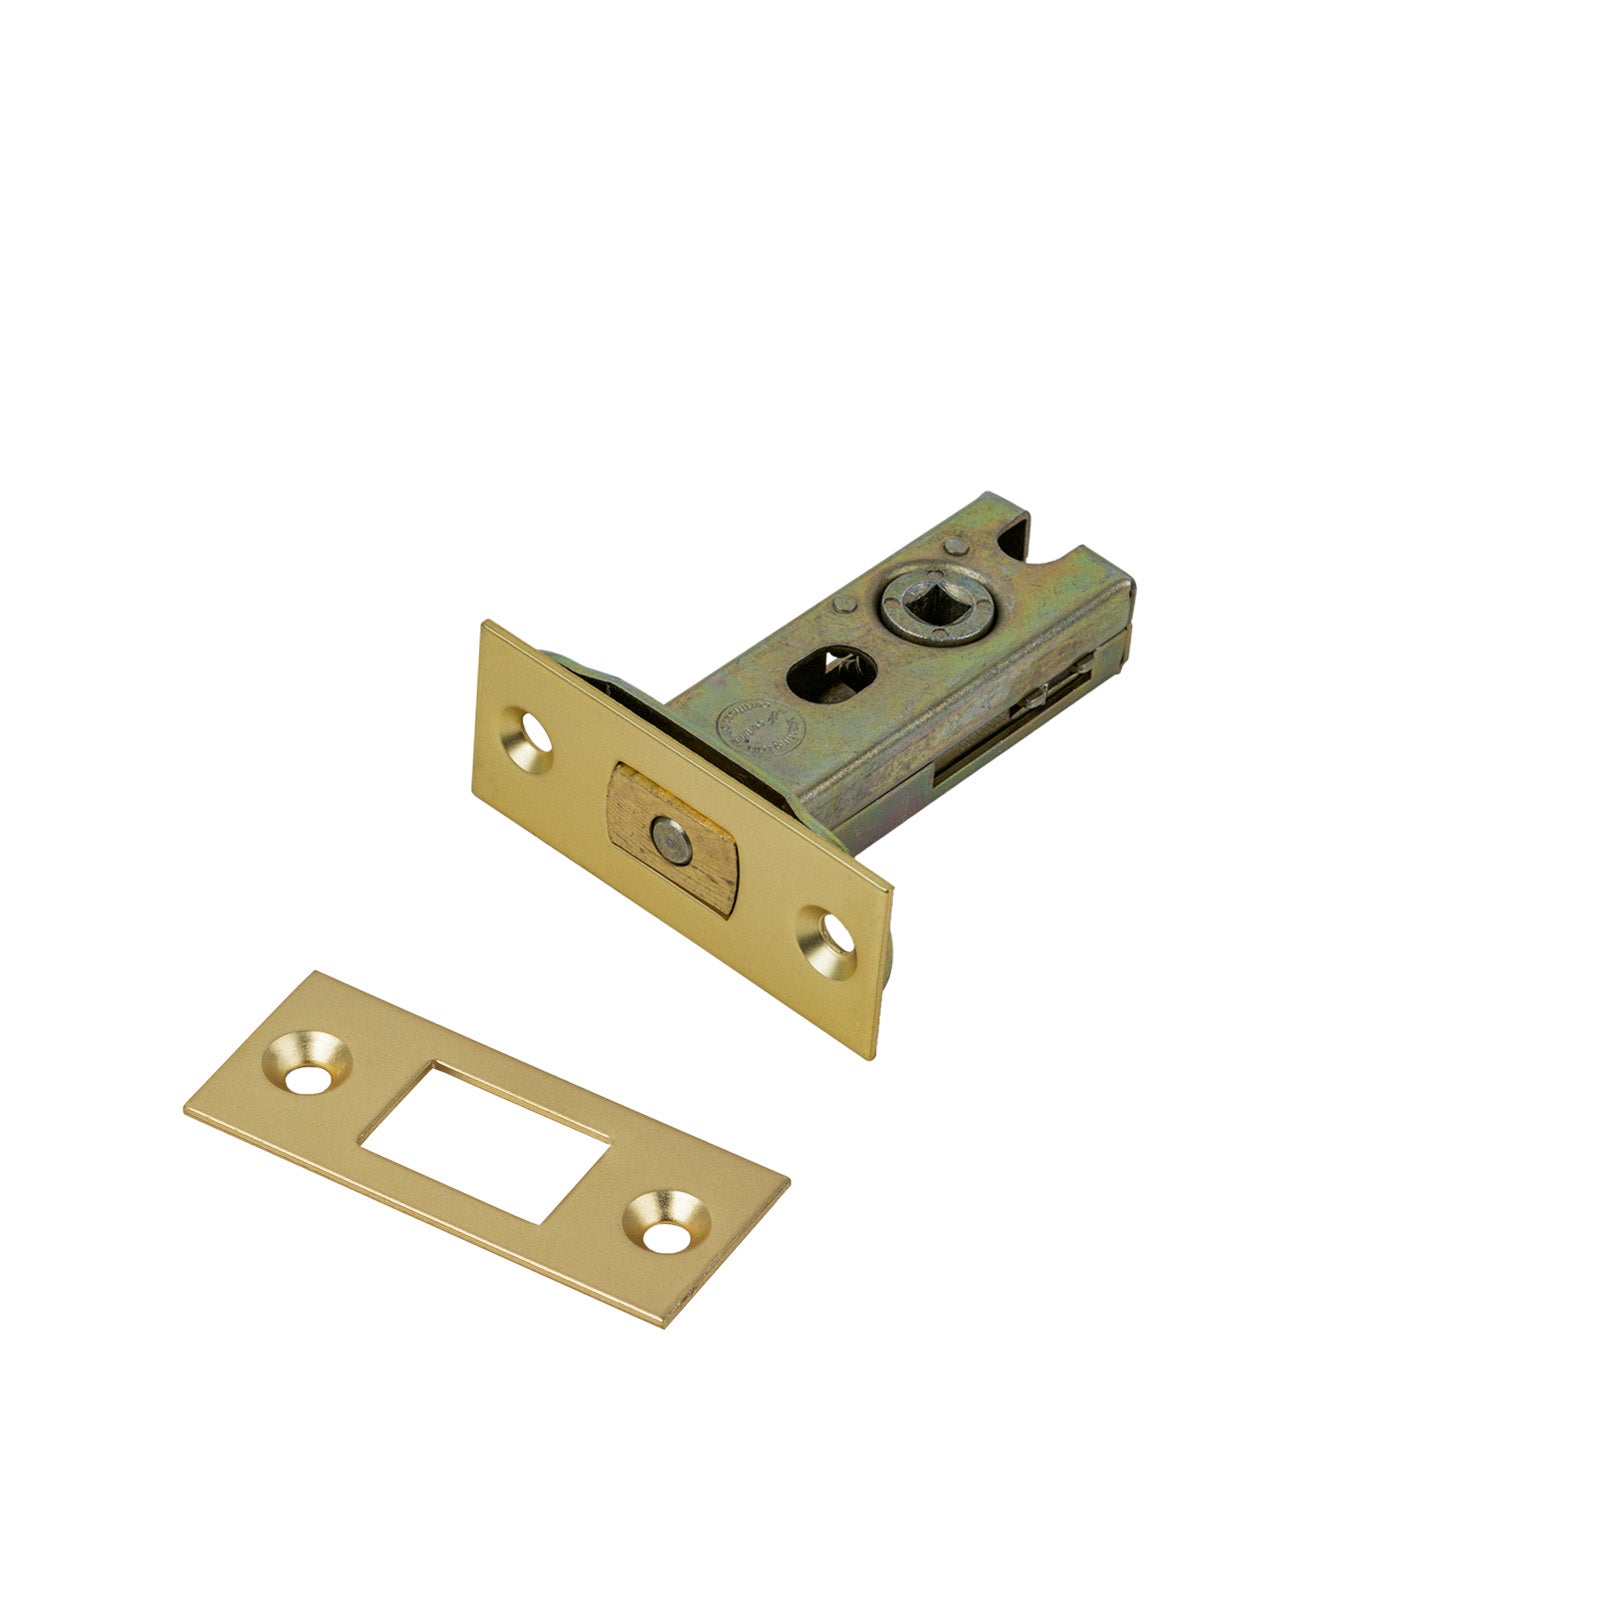 SHOW Bathroom Deadbolt - 2.5 Inch with Satin Brass finished forend and striker plate